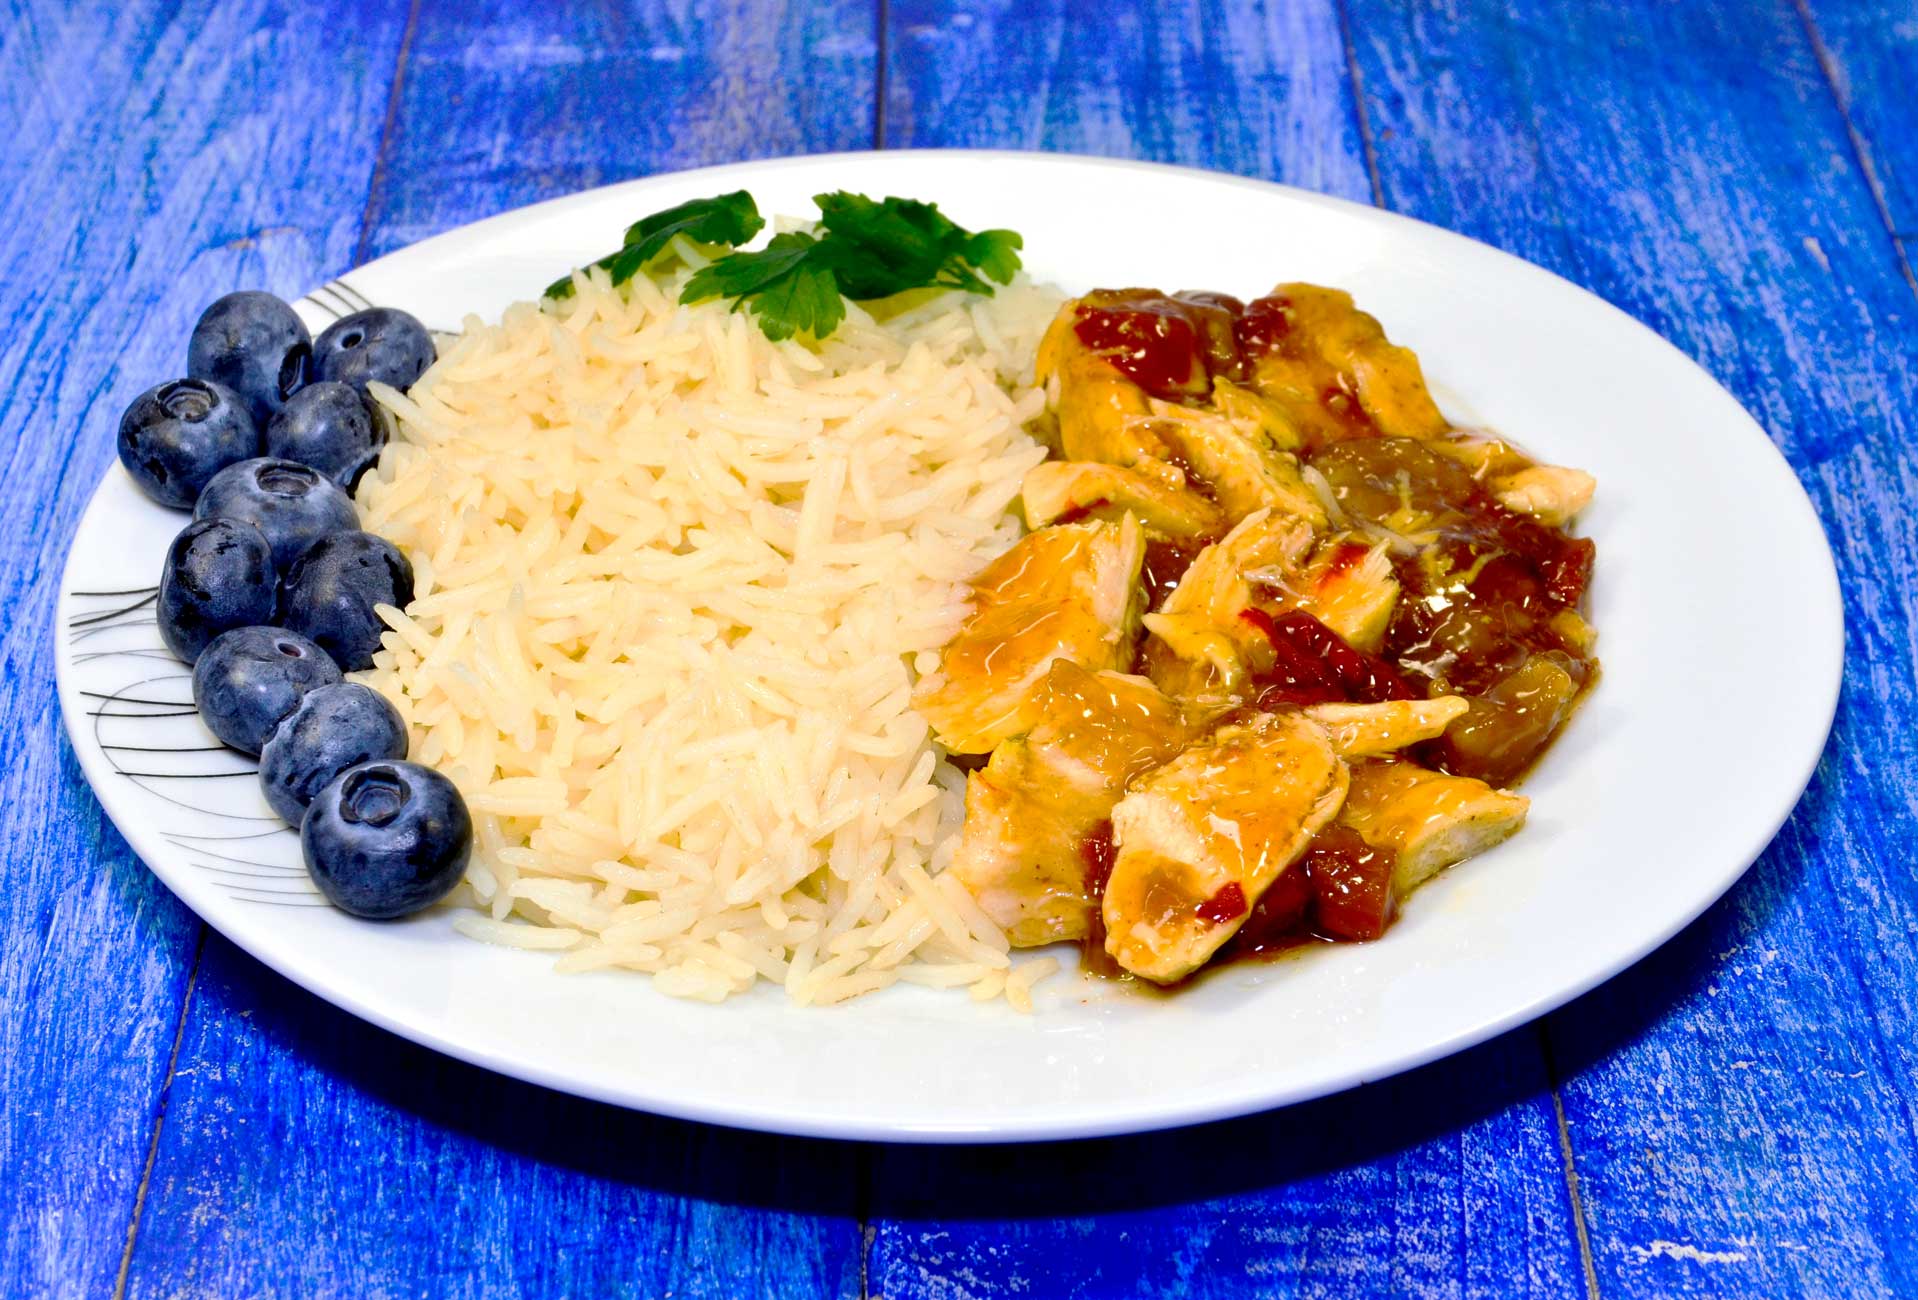 chicken recipes, rice with chicken recipes, sweet and sour sauce recipes